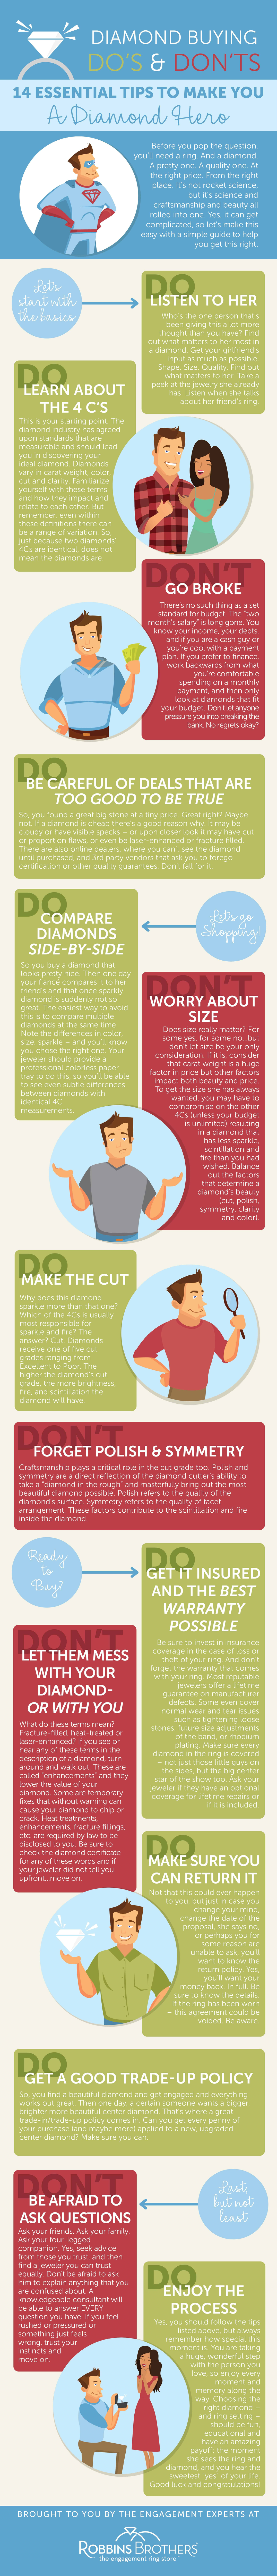 Dos Donts Diamond Buying INFOGRAPHICNEW